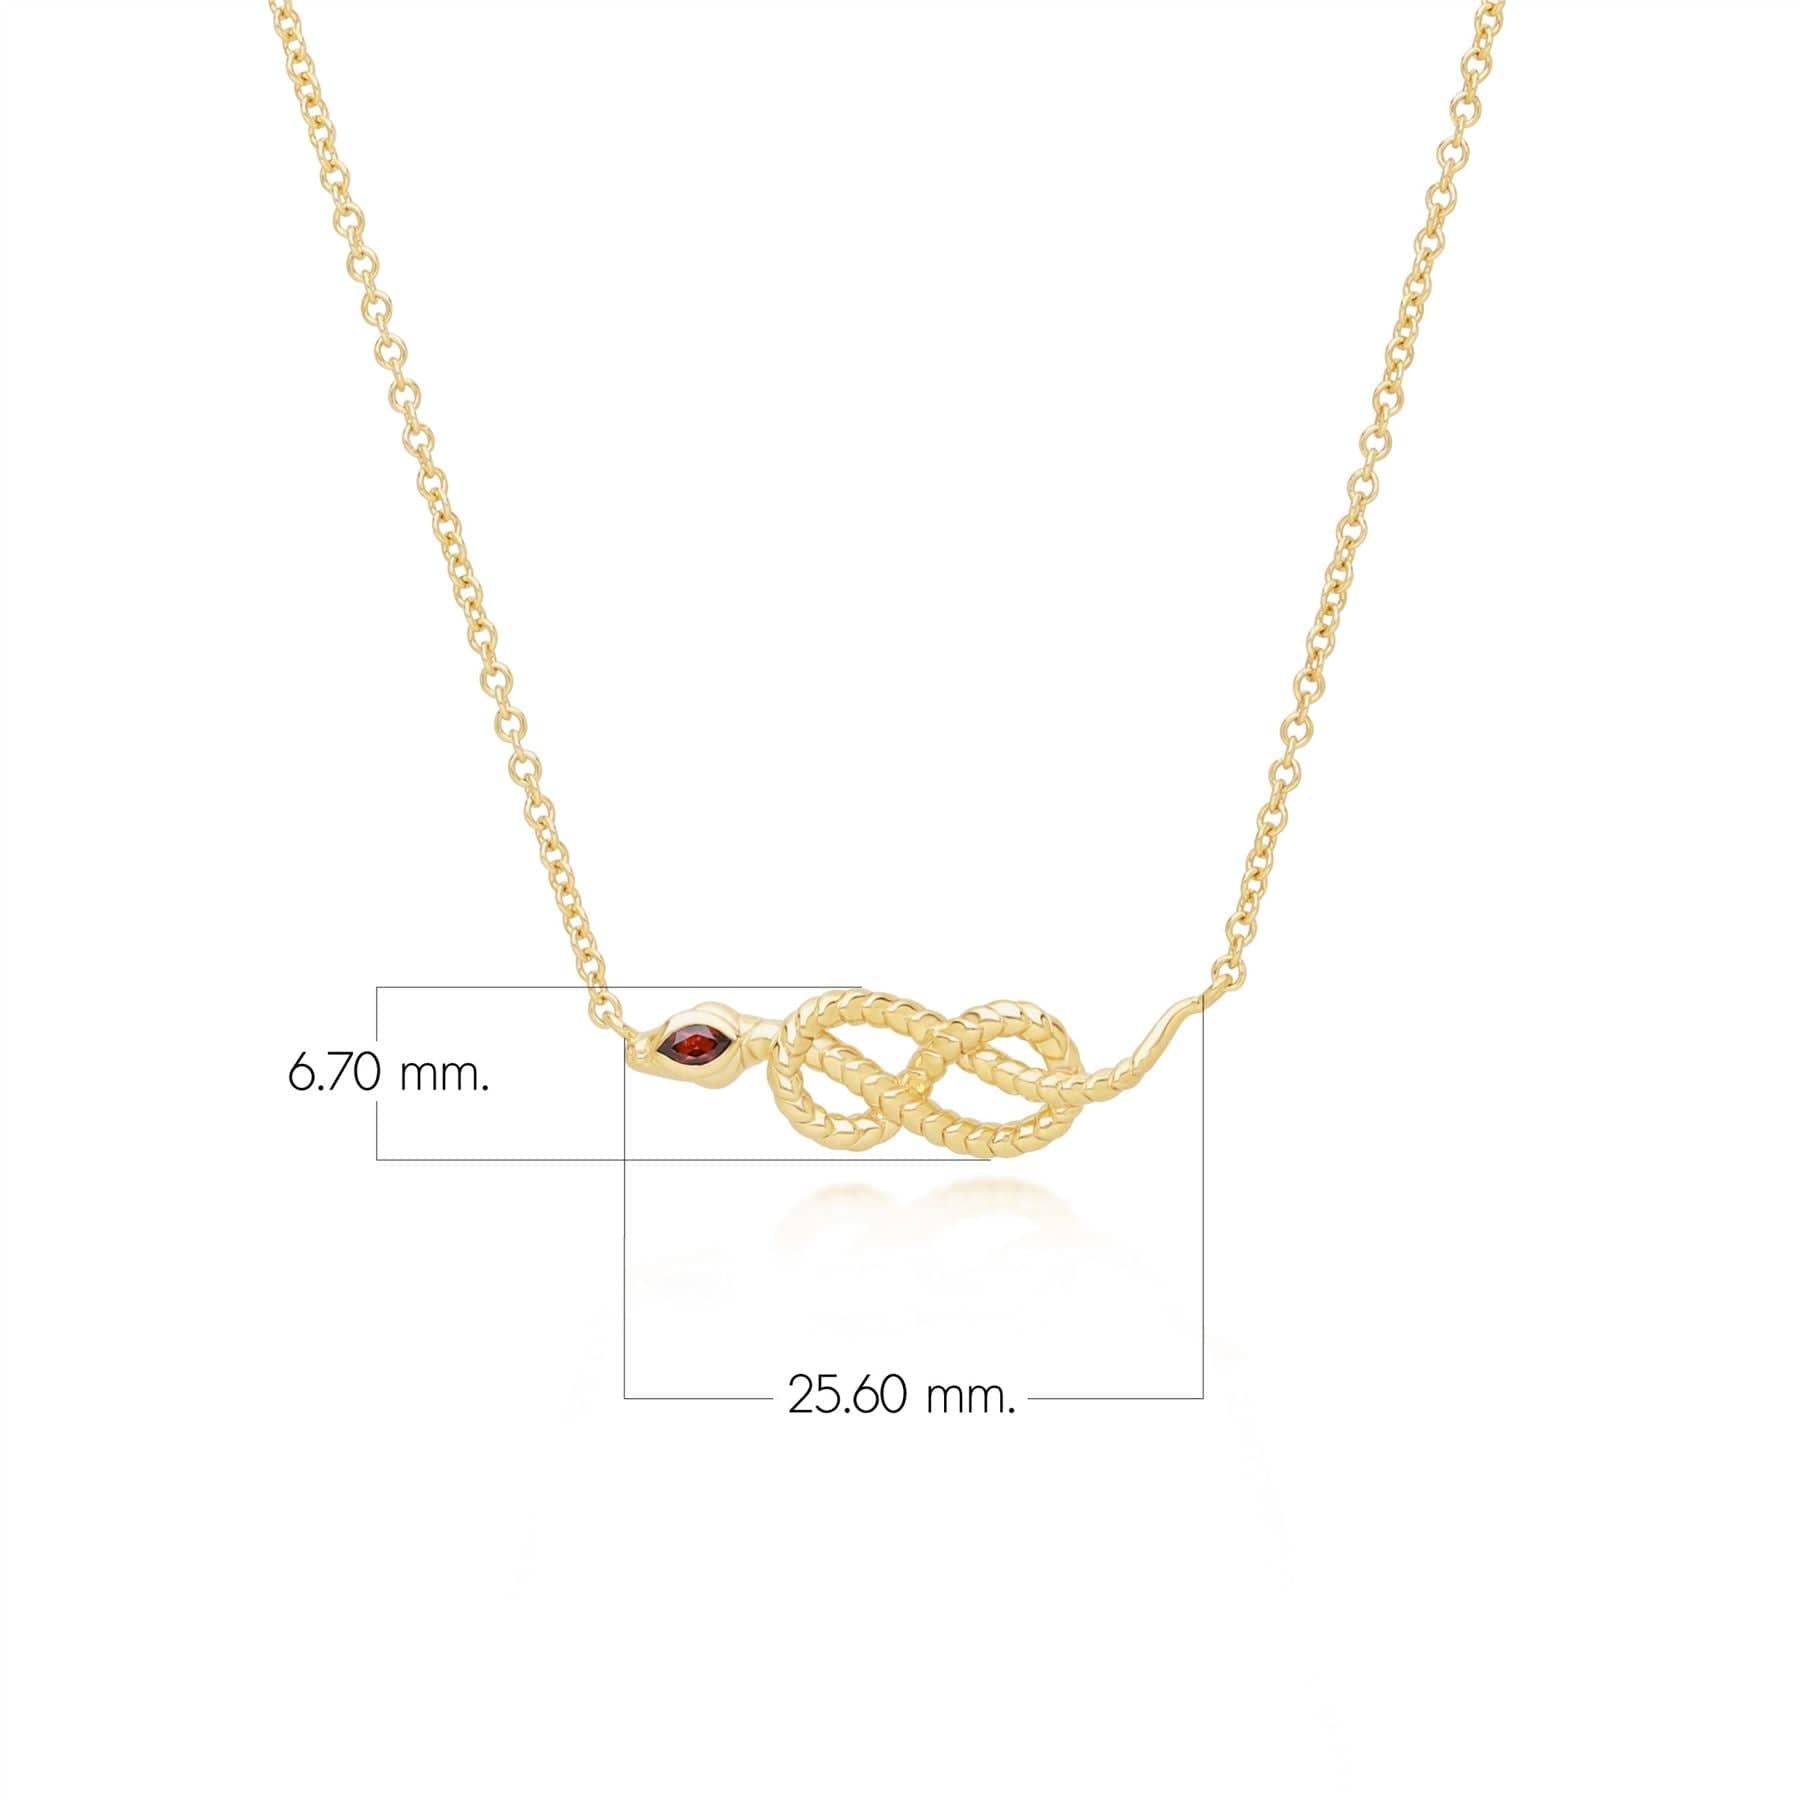 253N365801925 ECFEW™ Garnet Winding Snake Pendant Necklace in Gold Plated Sterling Silver Dimensions